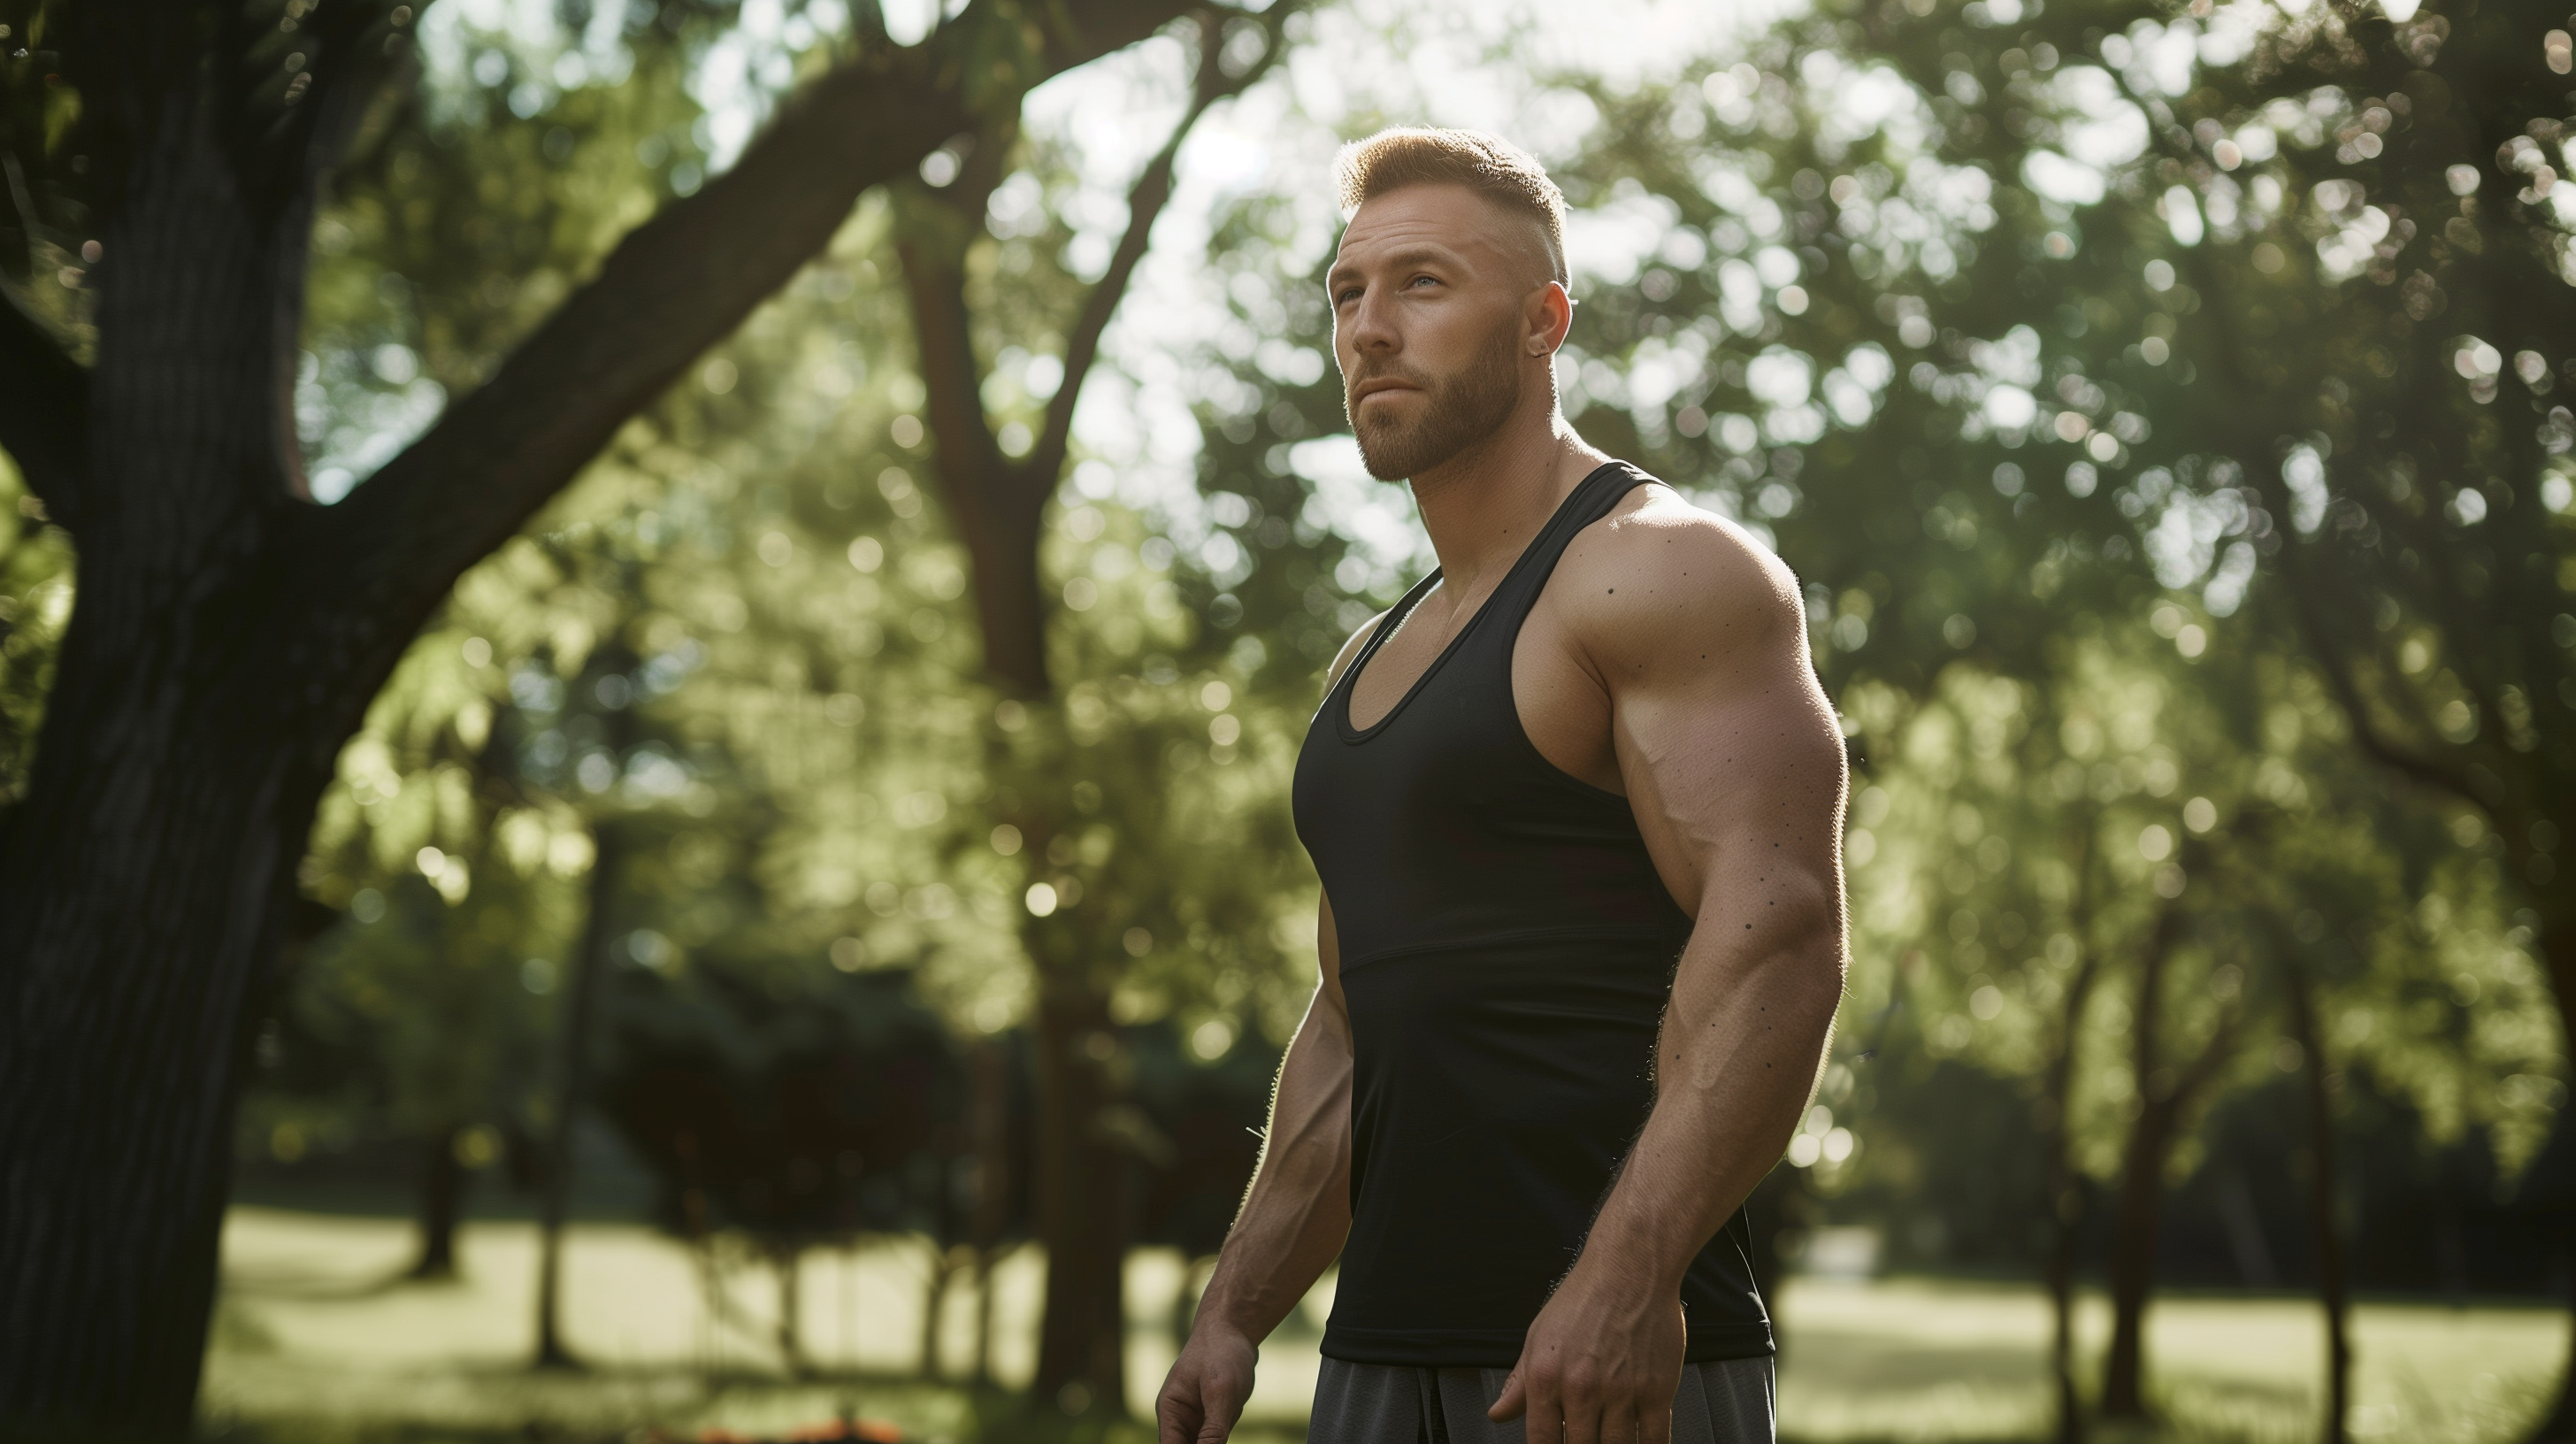 a muscular man at the park wearing workout clothes